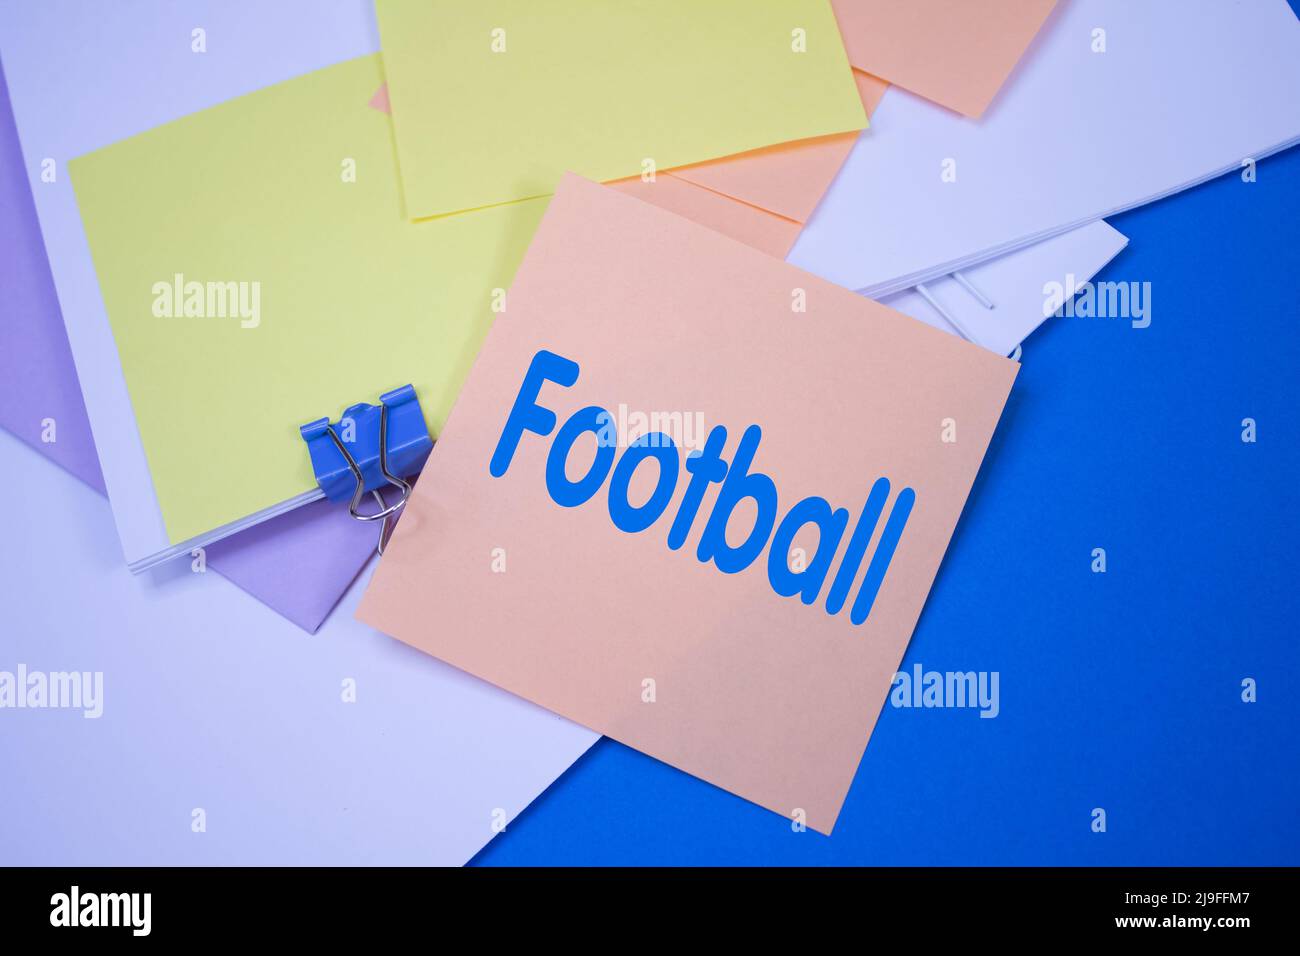 Football. Text on adhesive note paper. Event, celebration reminder message. Stock Photo